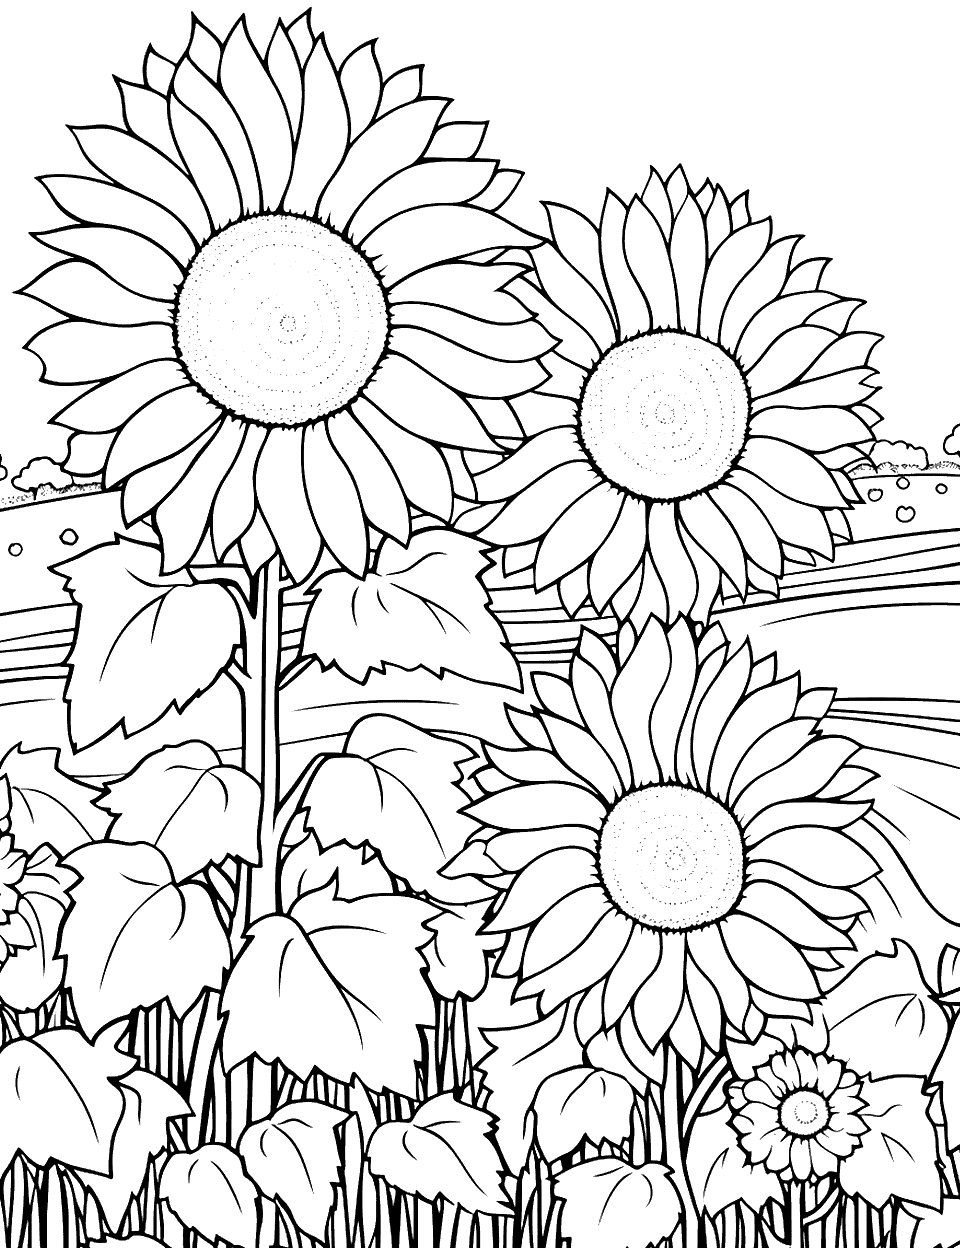 Sunflower Field Farm Coloring Page - A field full of tall sunflowers.